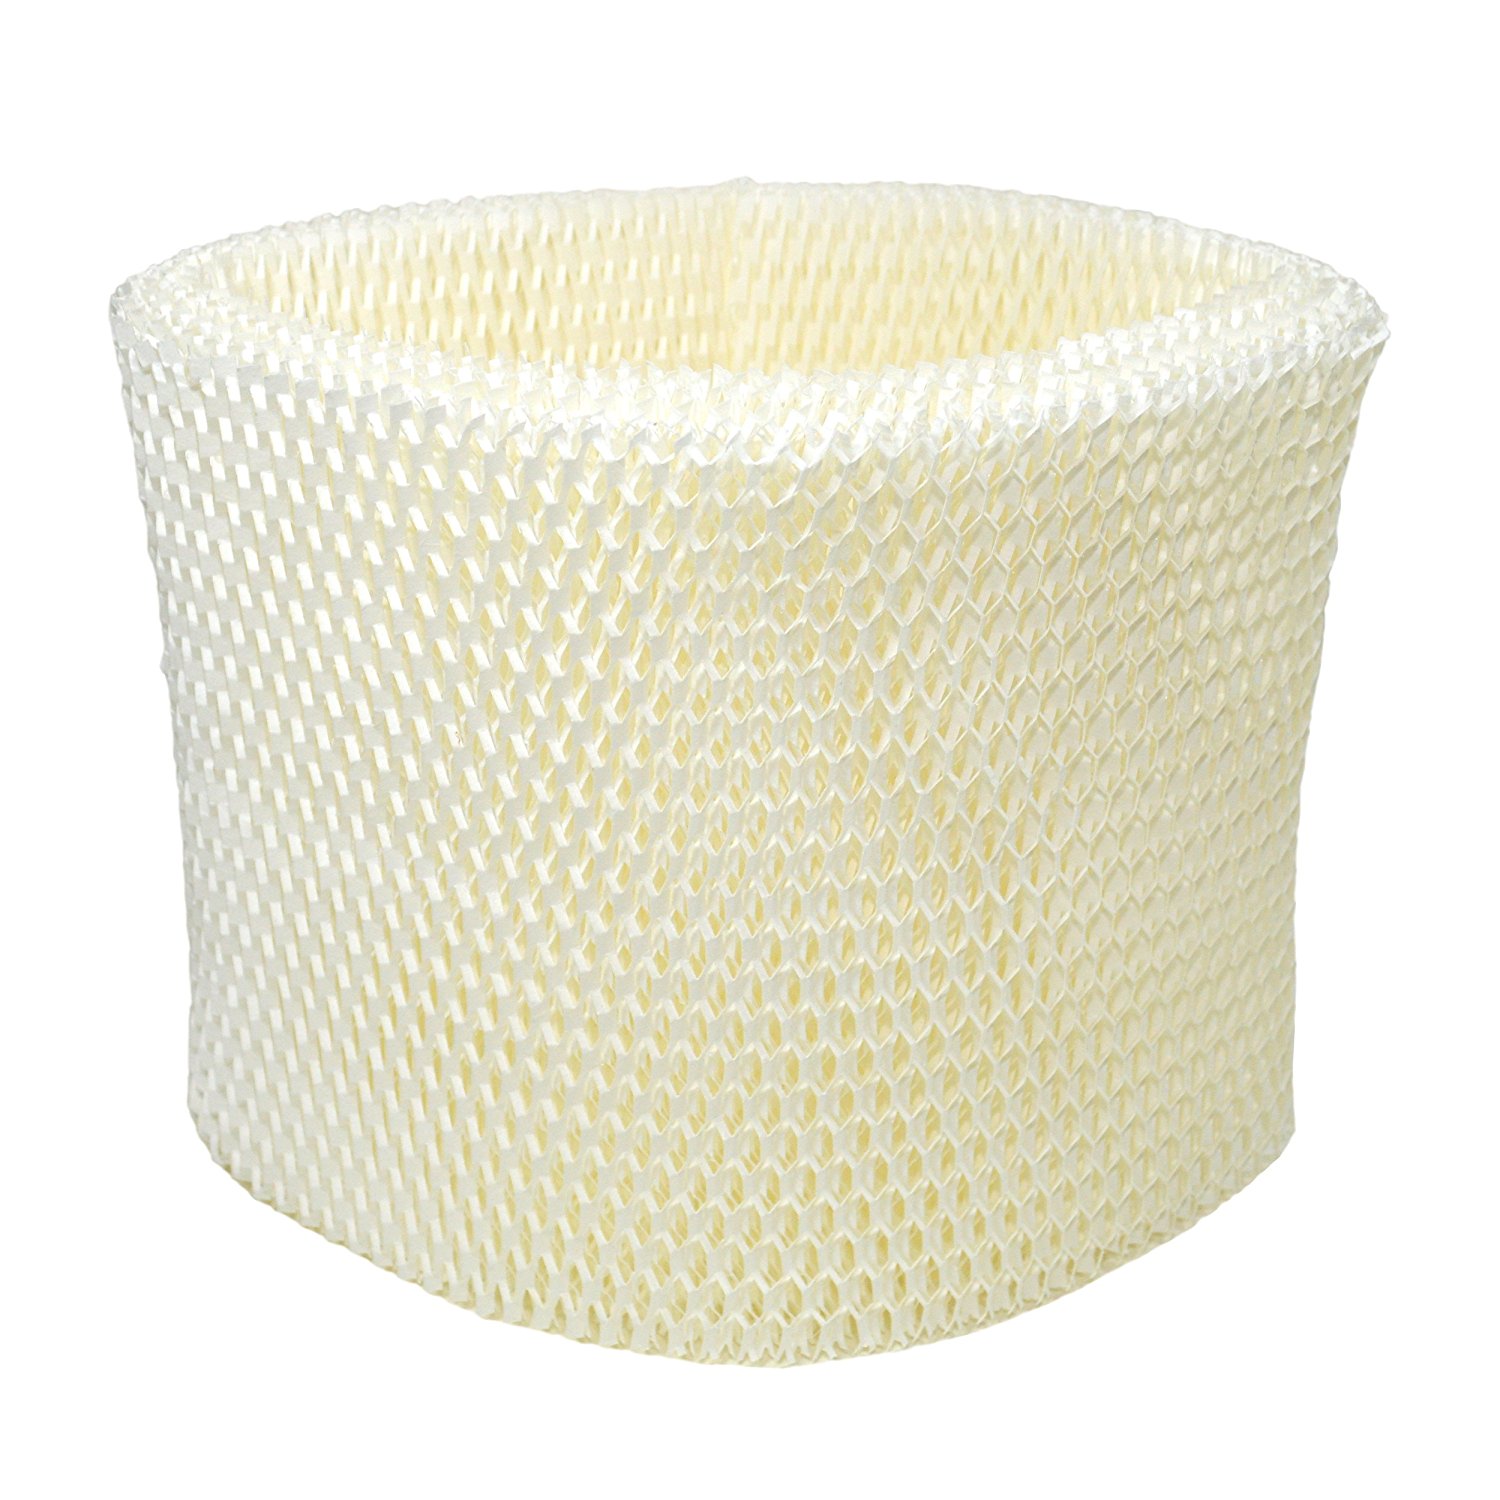 HQRP Humidifier Wicking Filter for White Westinghouse HWF-65 / WWH650 / H65-C Replacement 